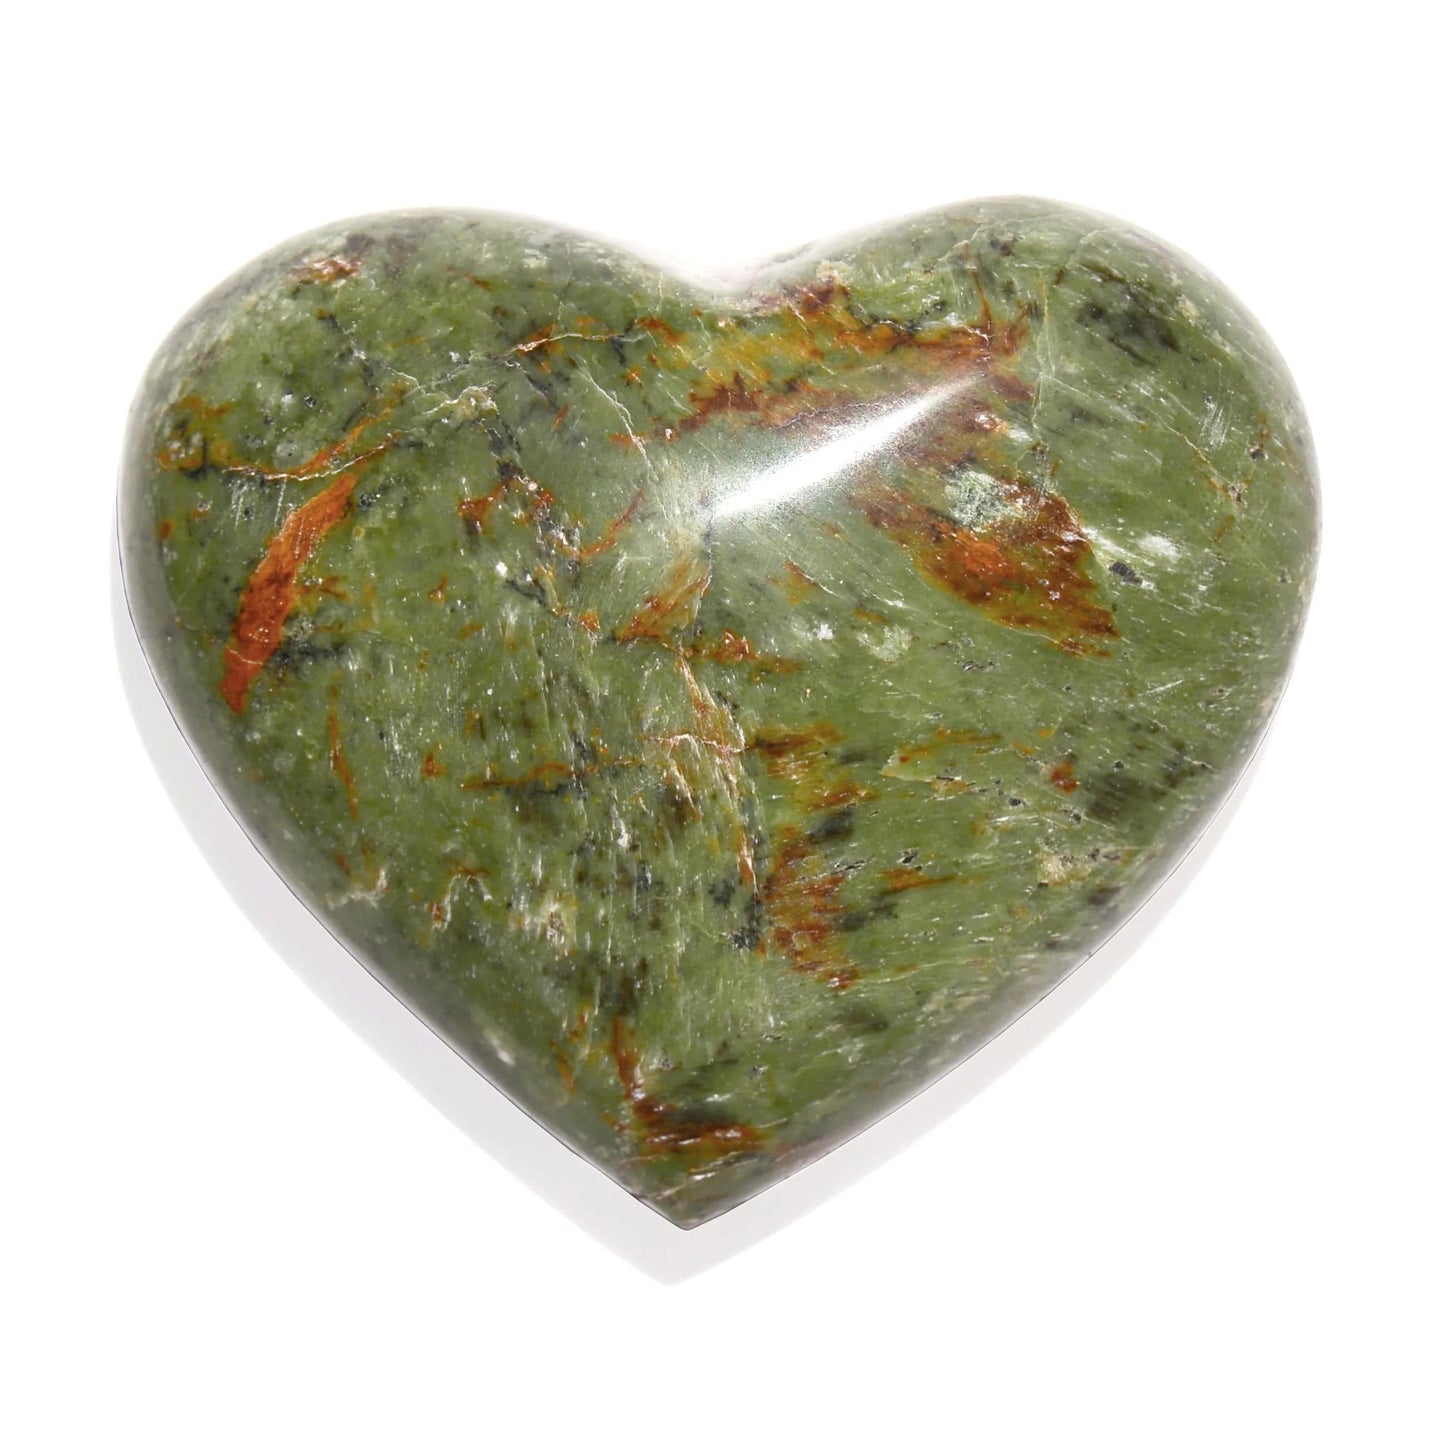 Chrysoprase Heart Crystal Carving - Polished